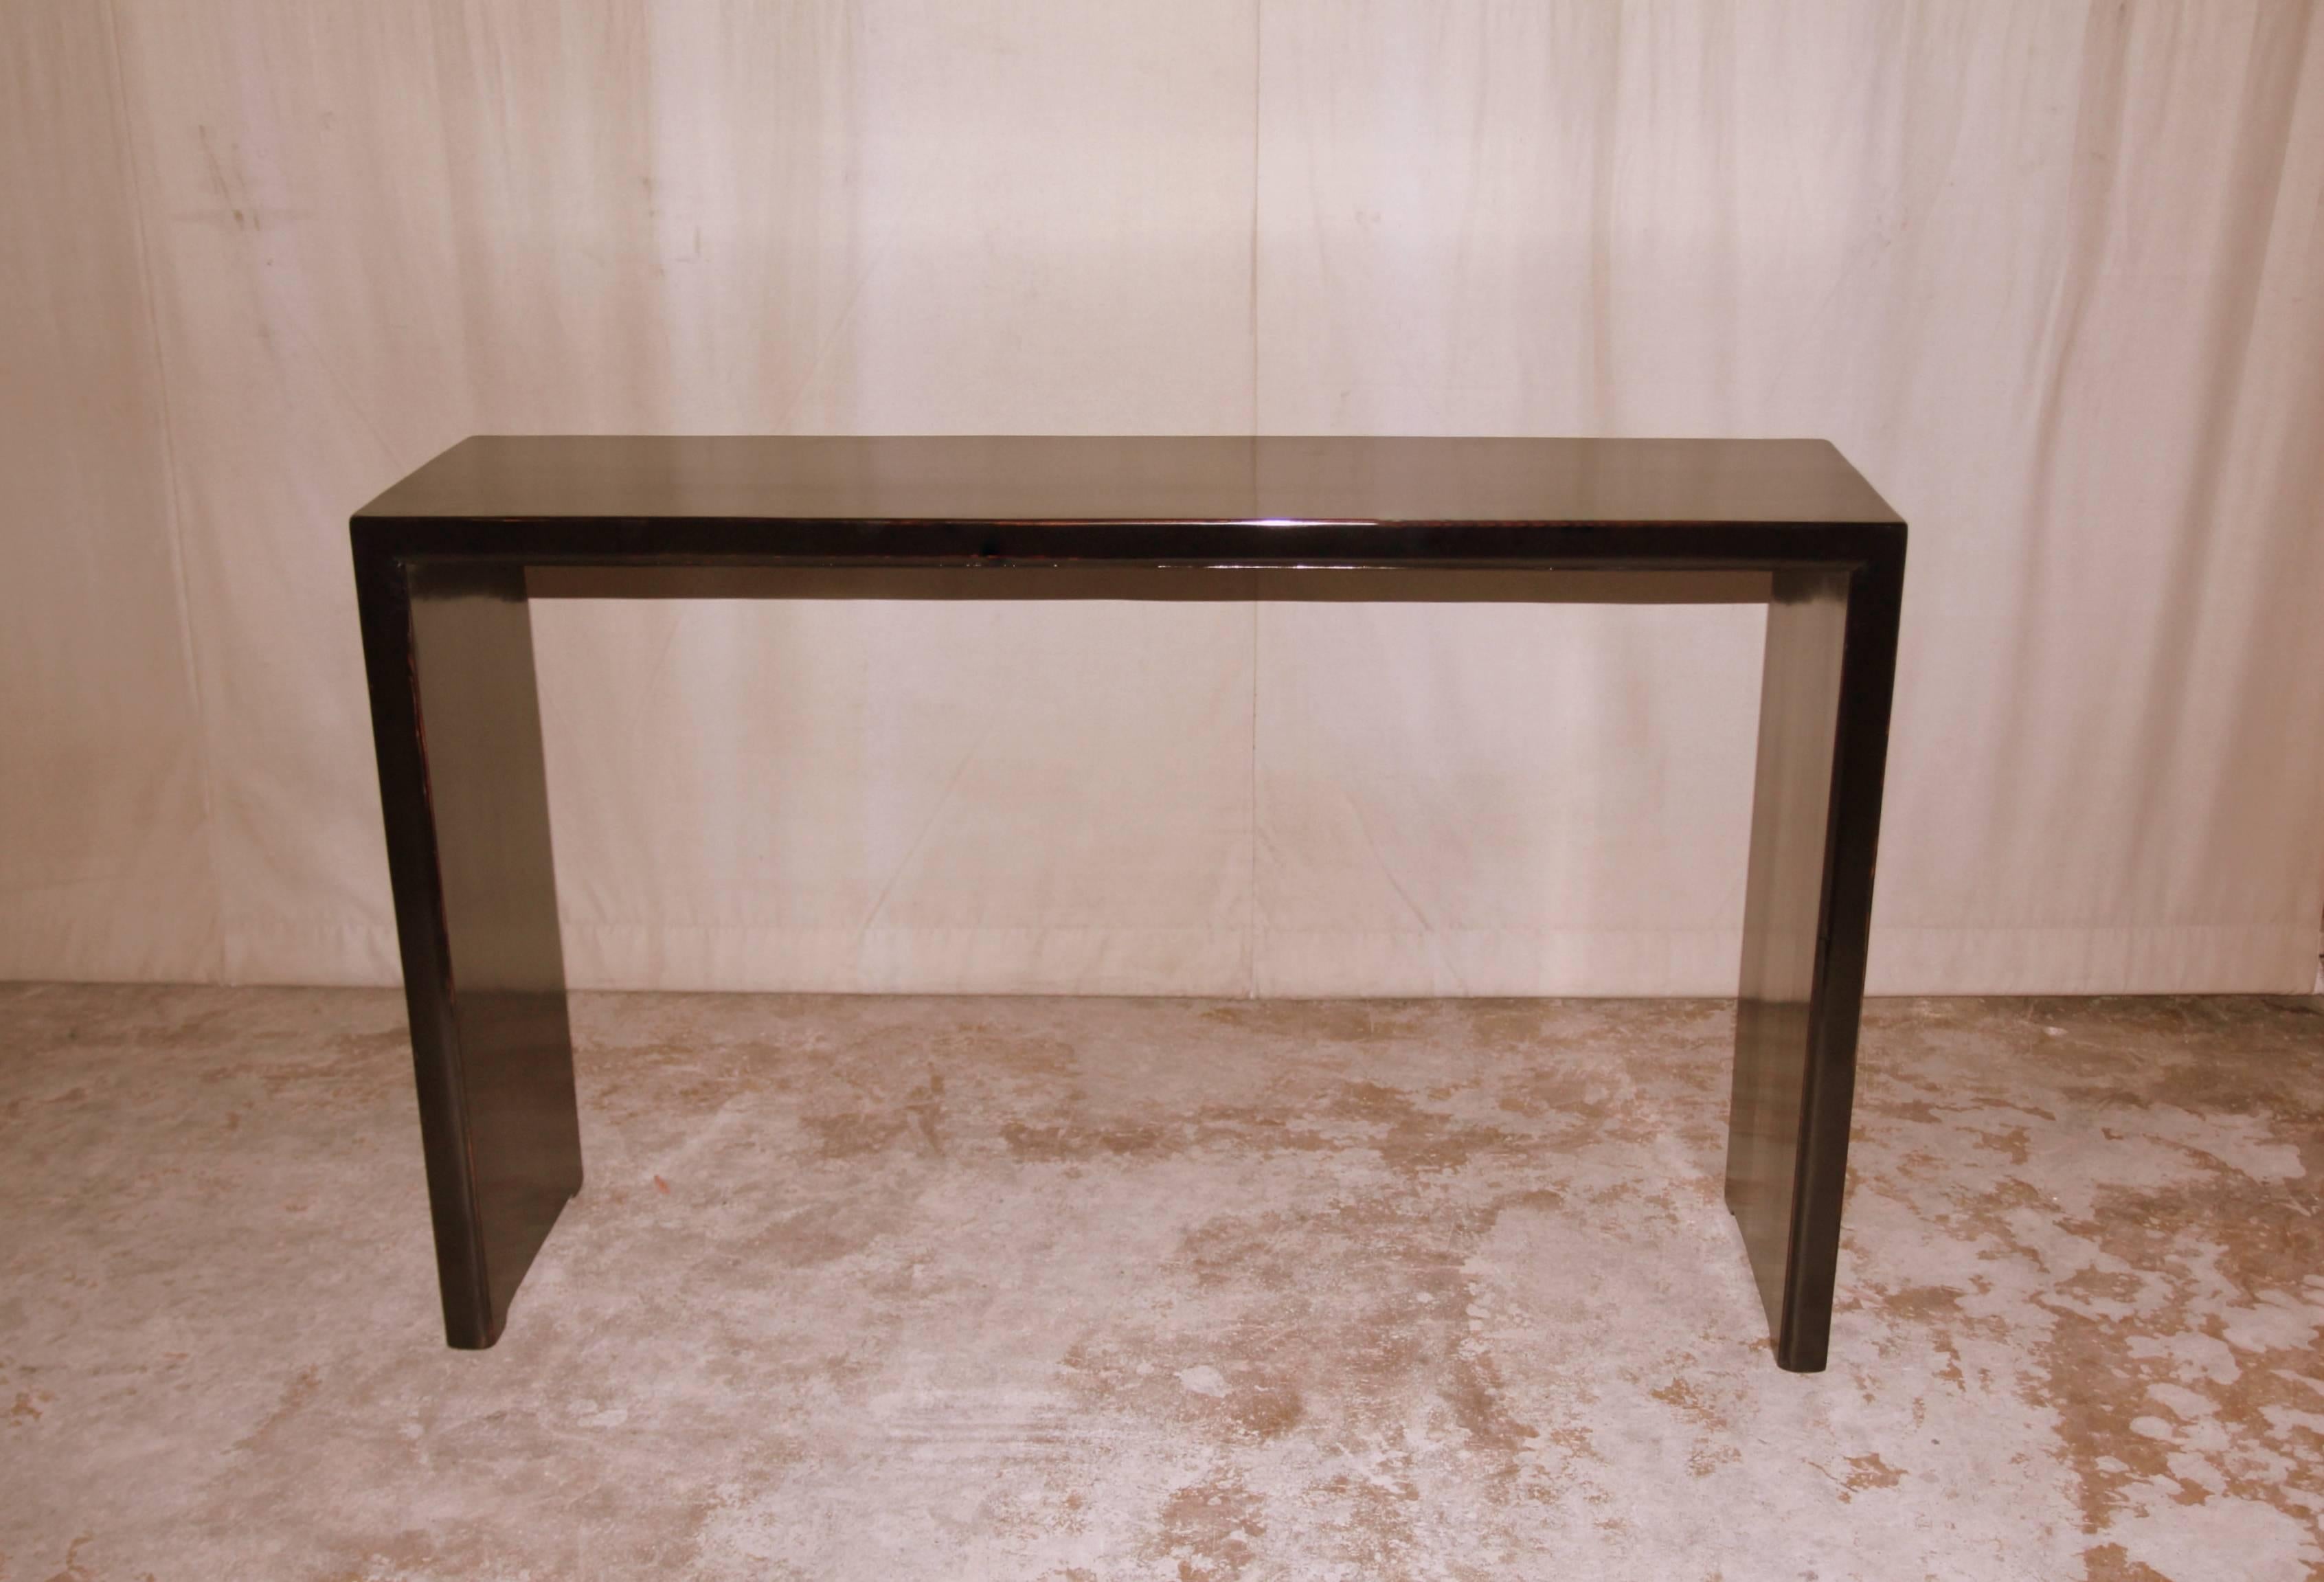 A simple and refined black lacquer console table, single plank top supported by waterfall legs. Pair available. Beautiful color, form and lines.